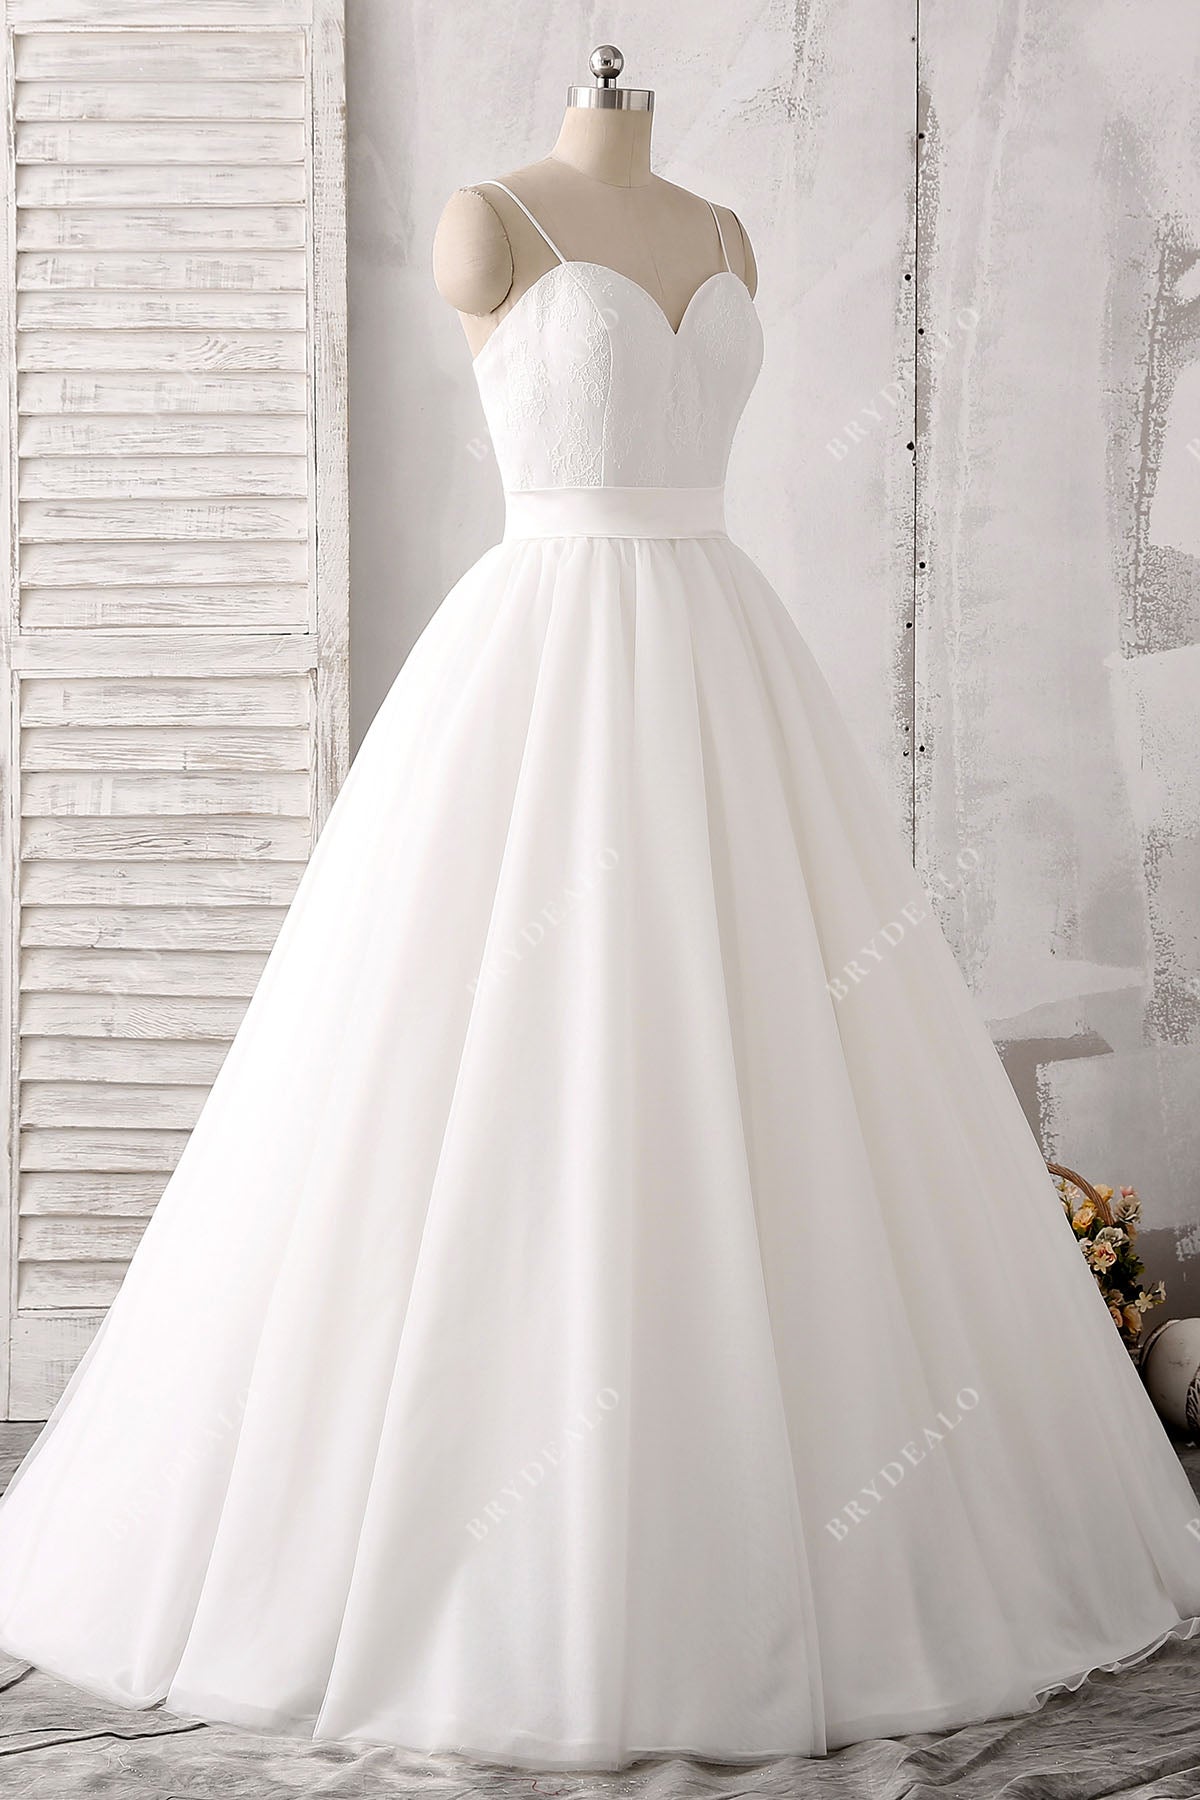 sweetheart A-line wedding dress for wholesale